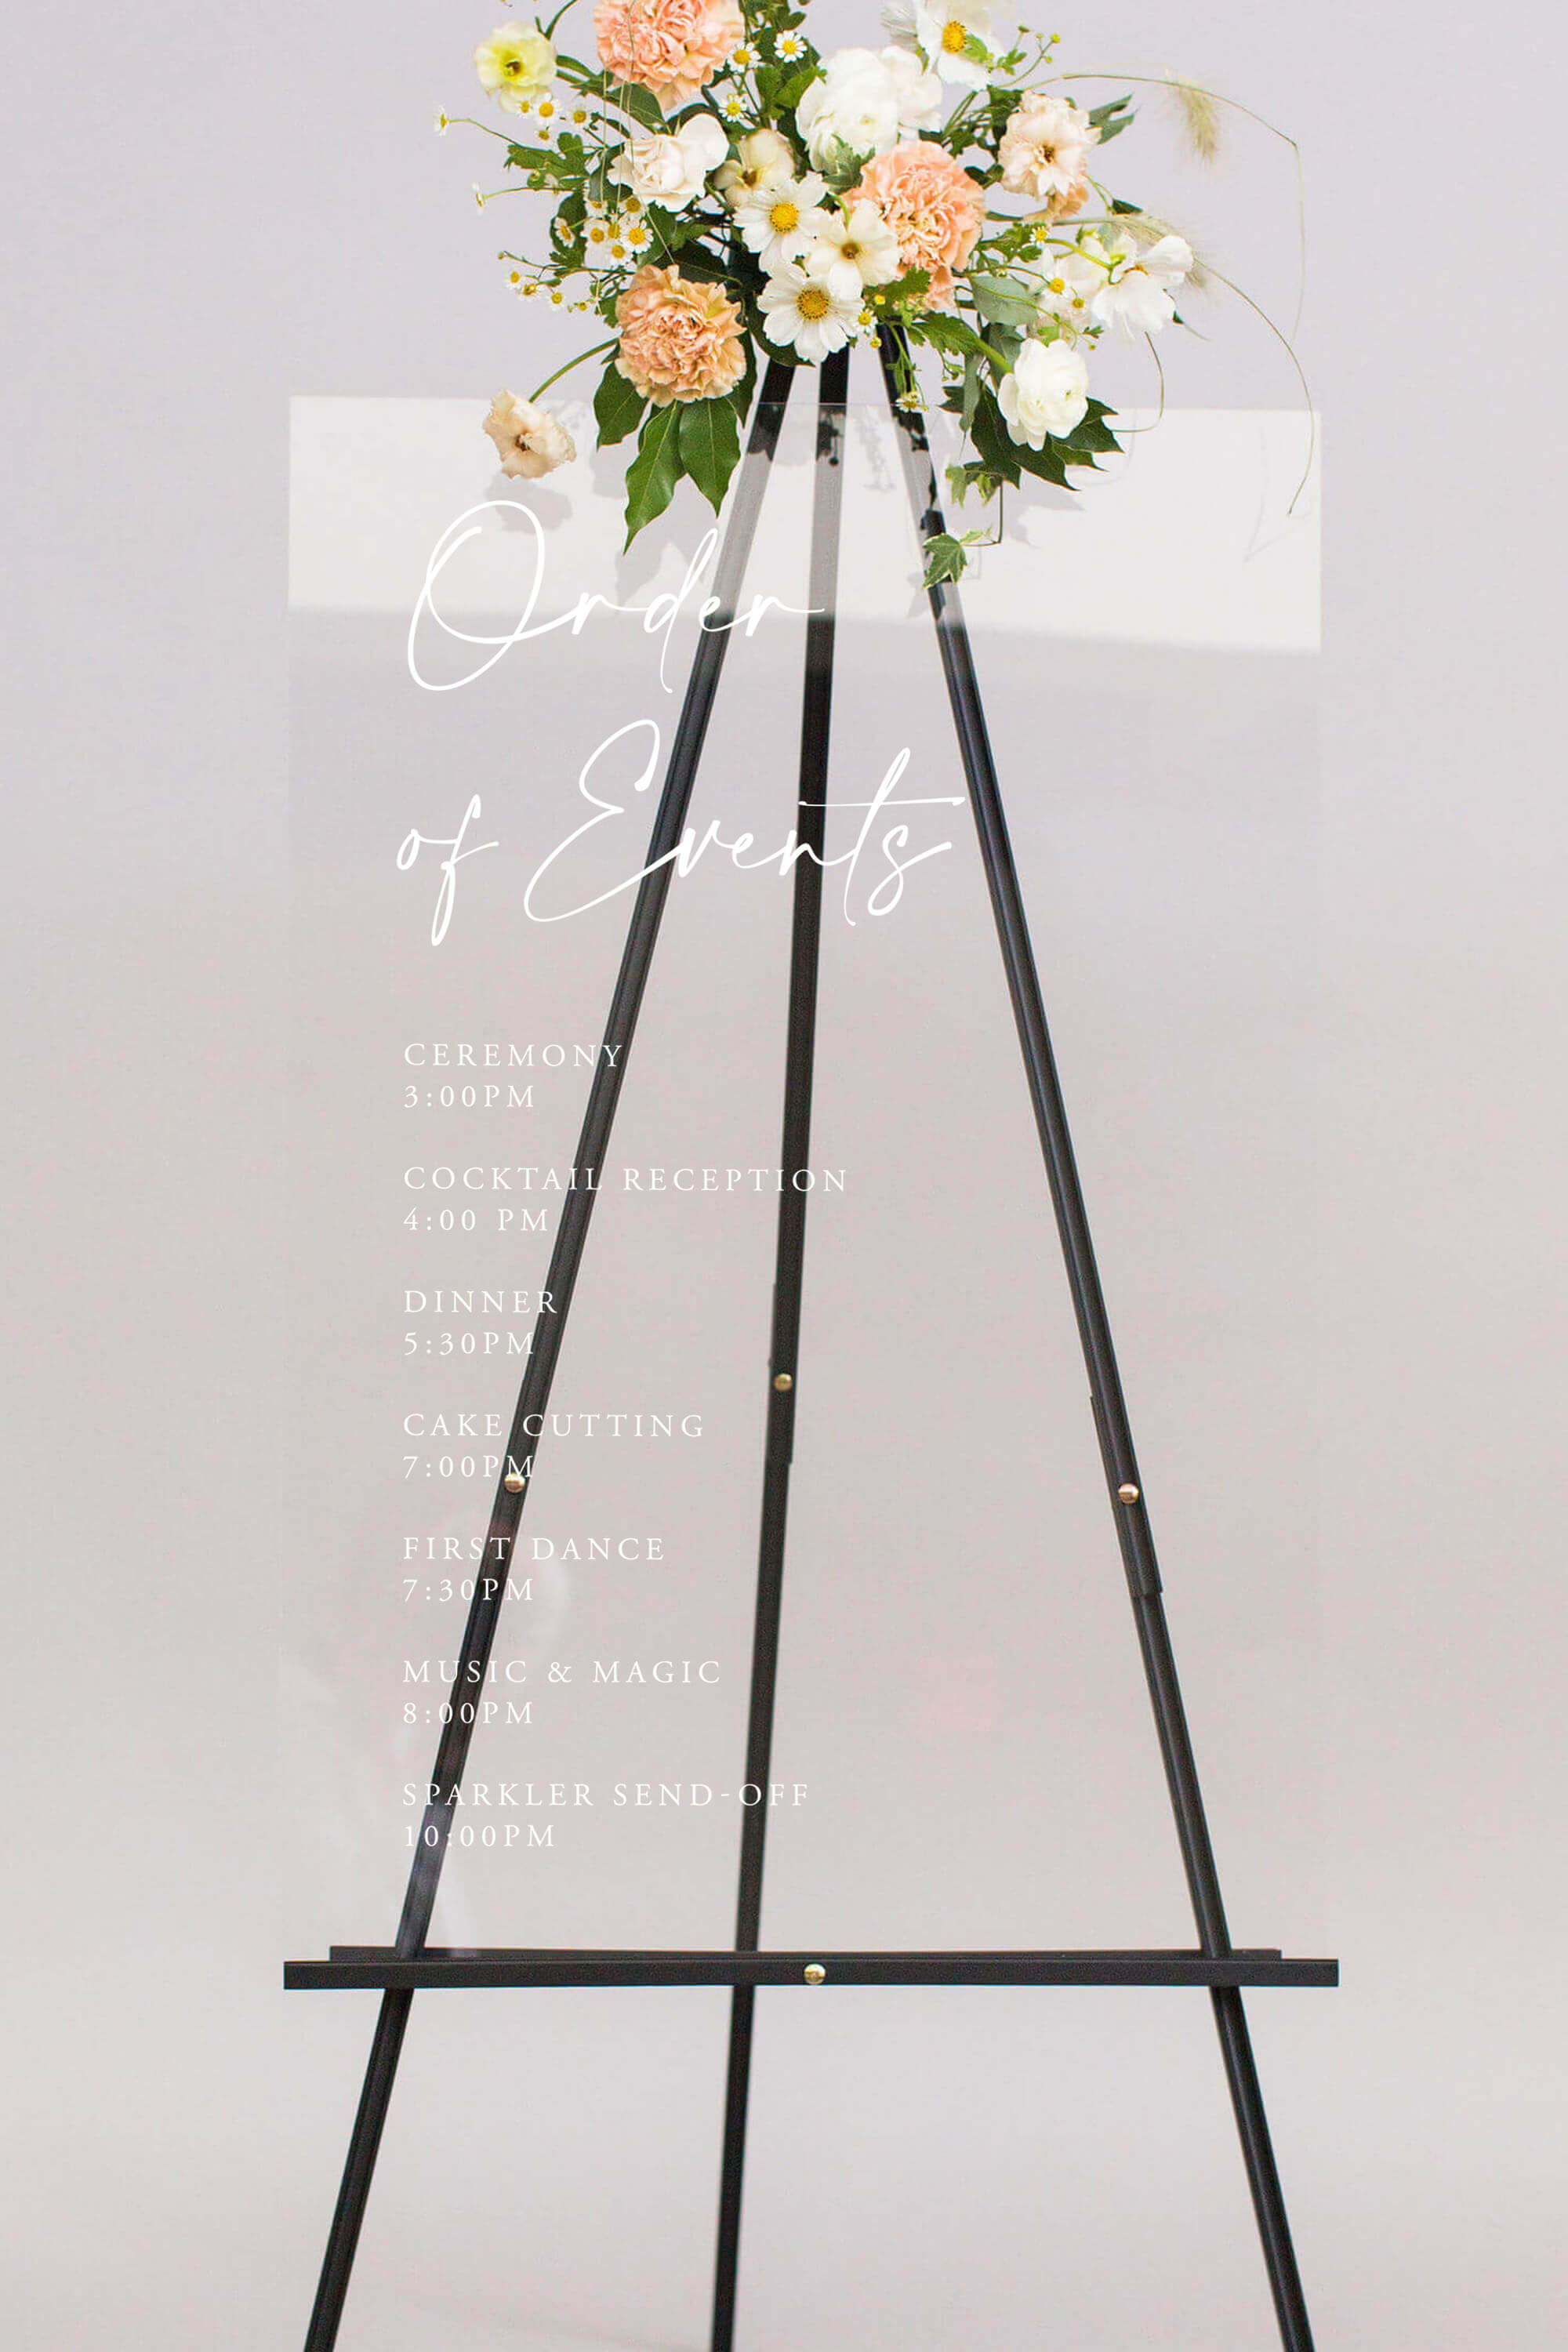 Clear Acrylic Wedding Order Of Events Sign Acrylic